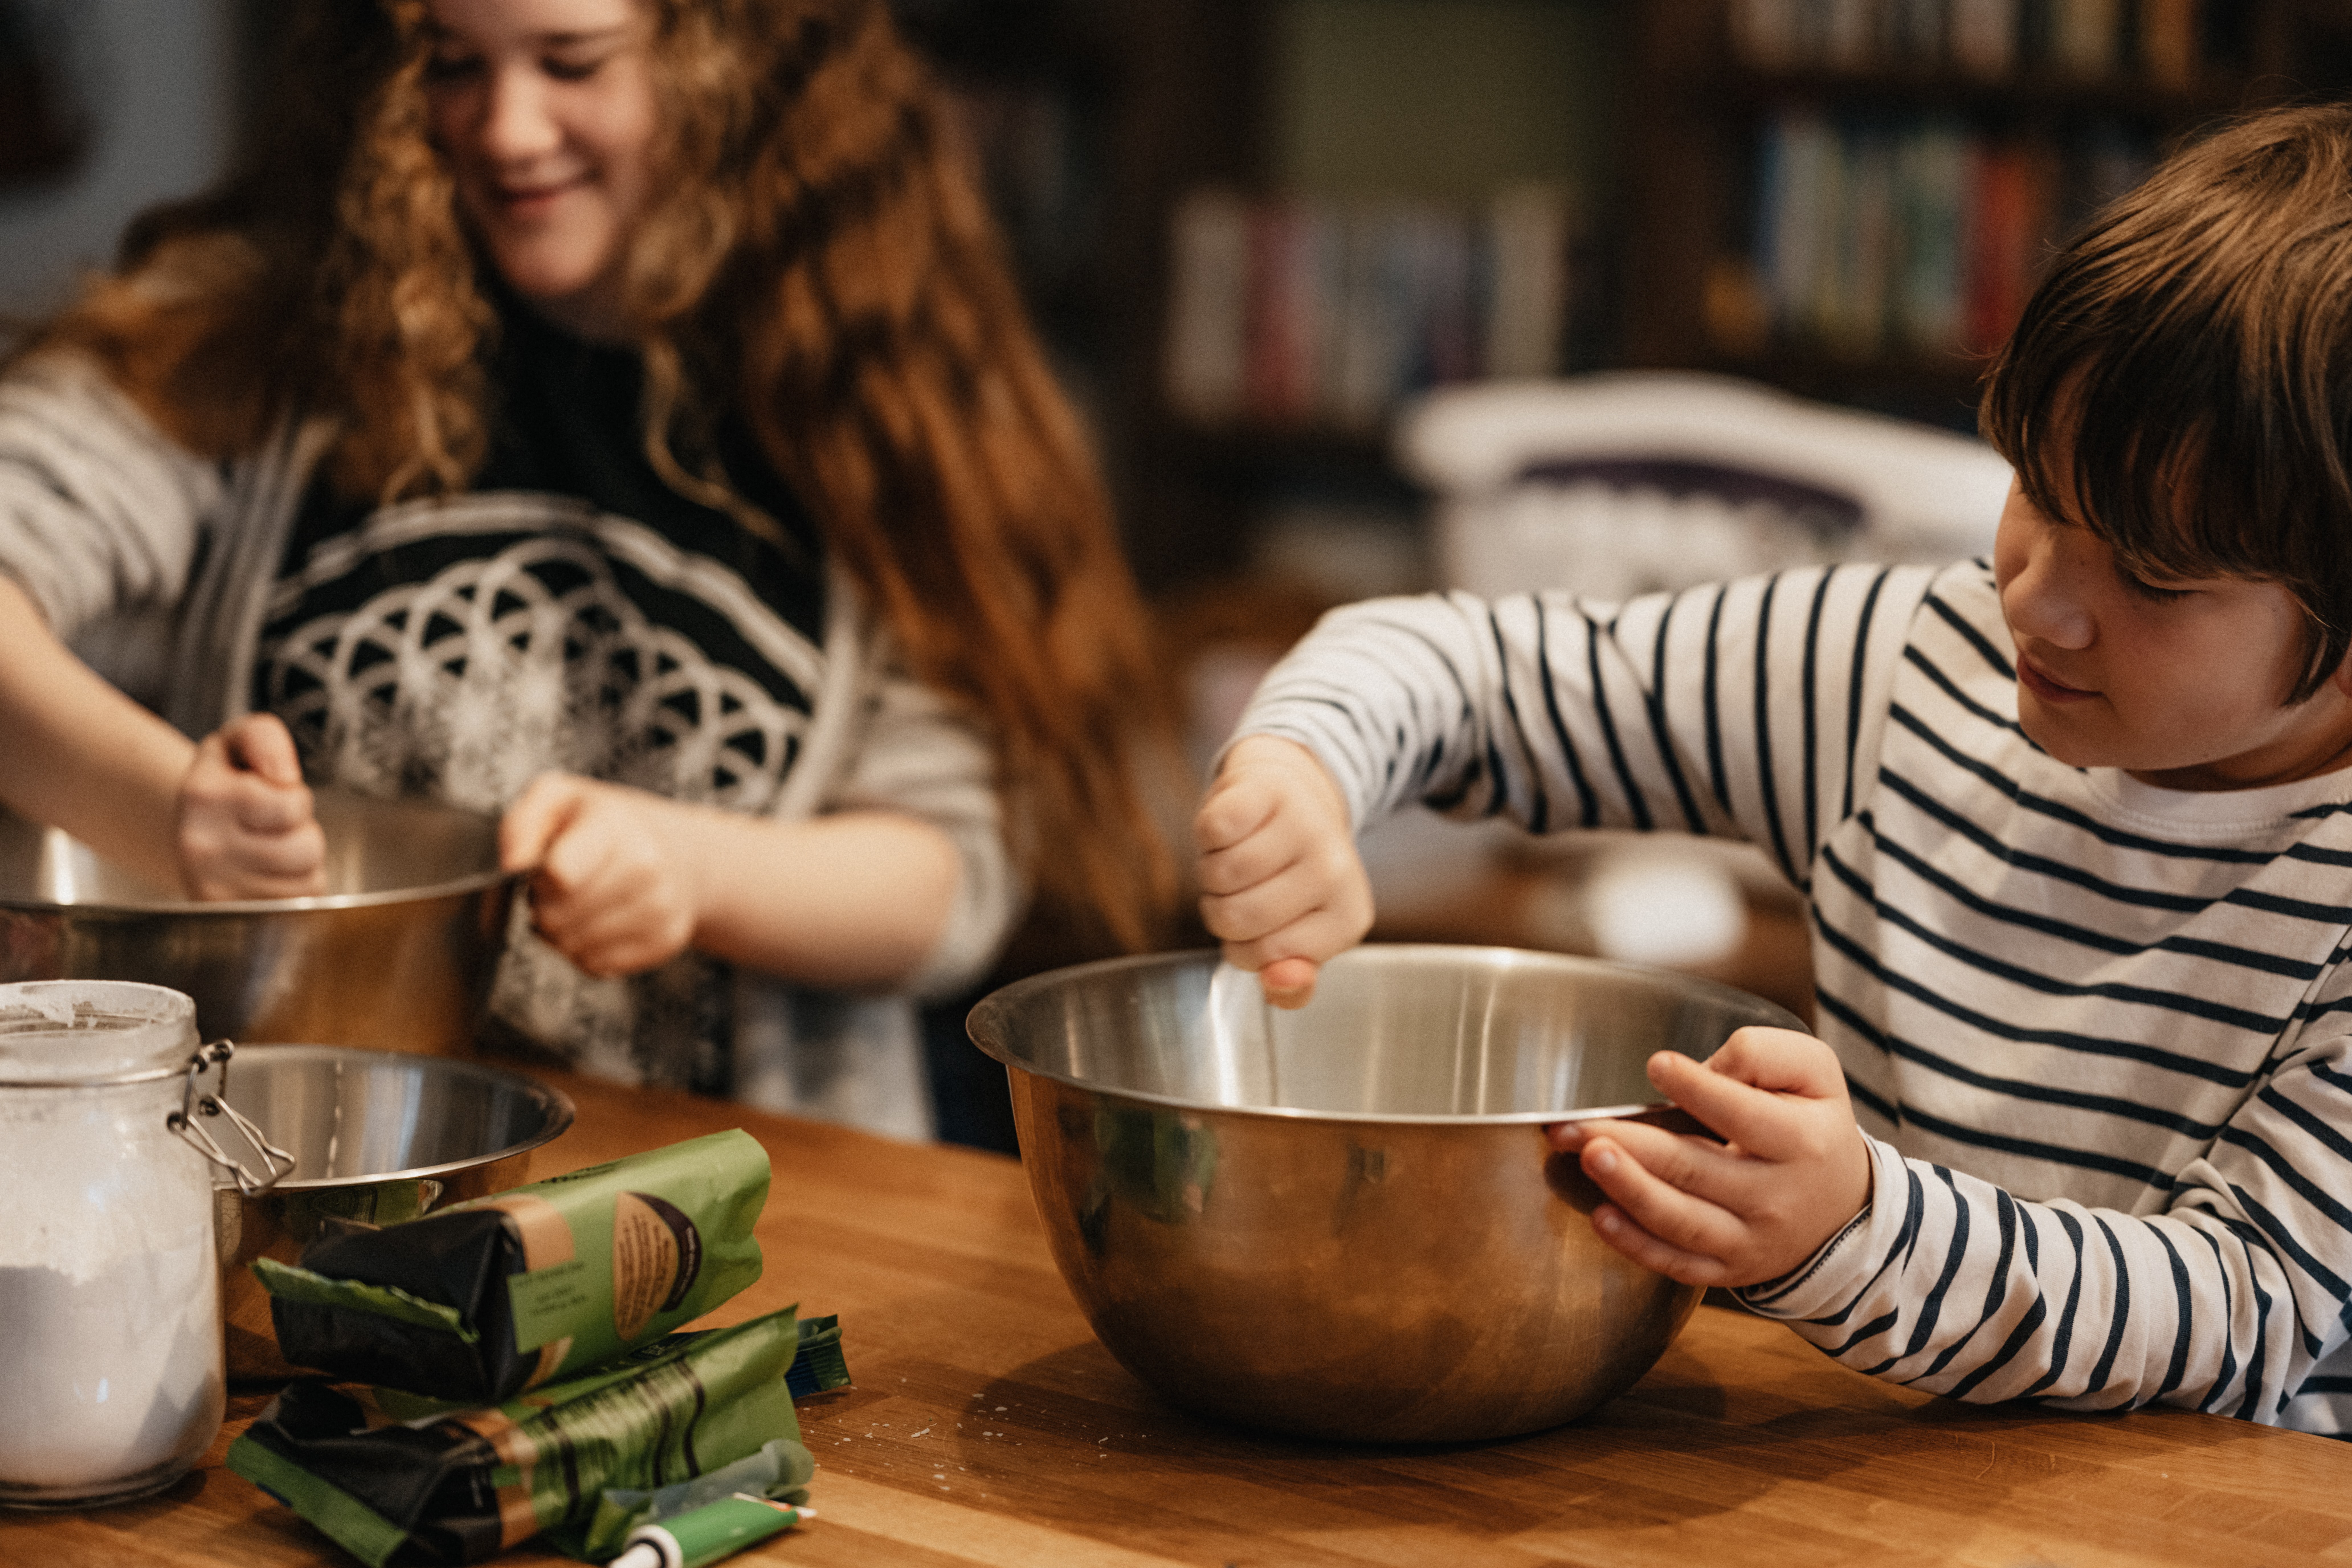 Canned Food News: Empowering Kids In The Kitchen